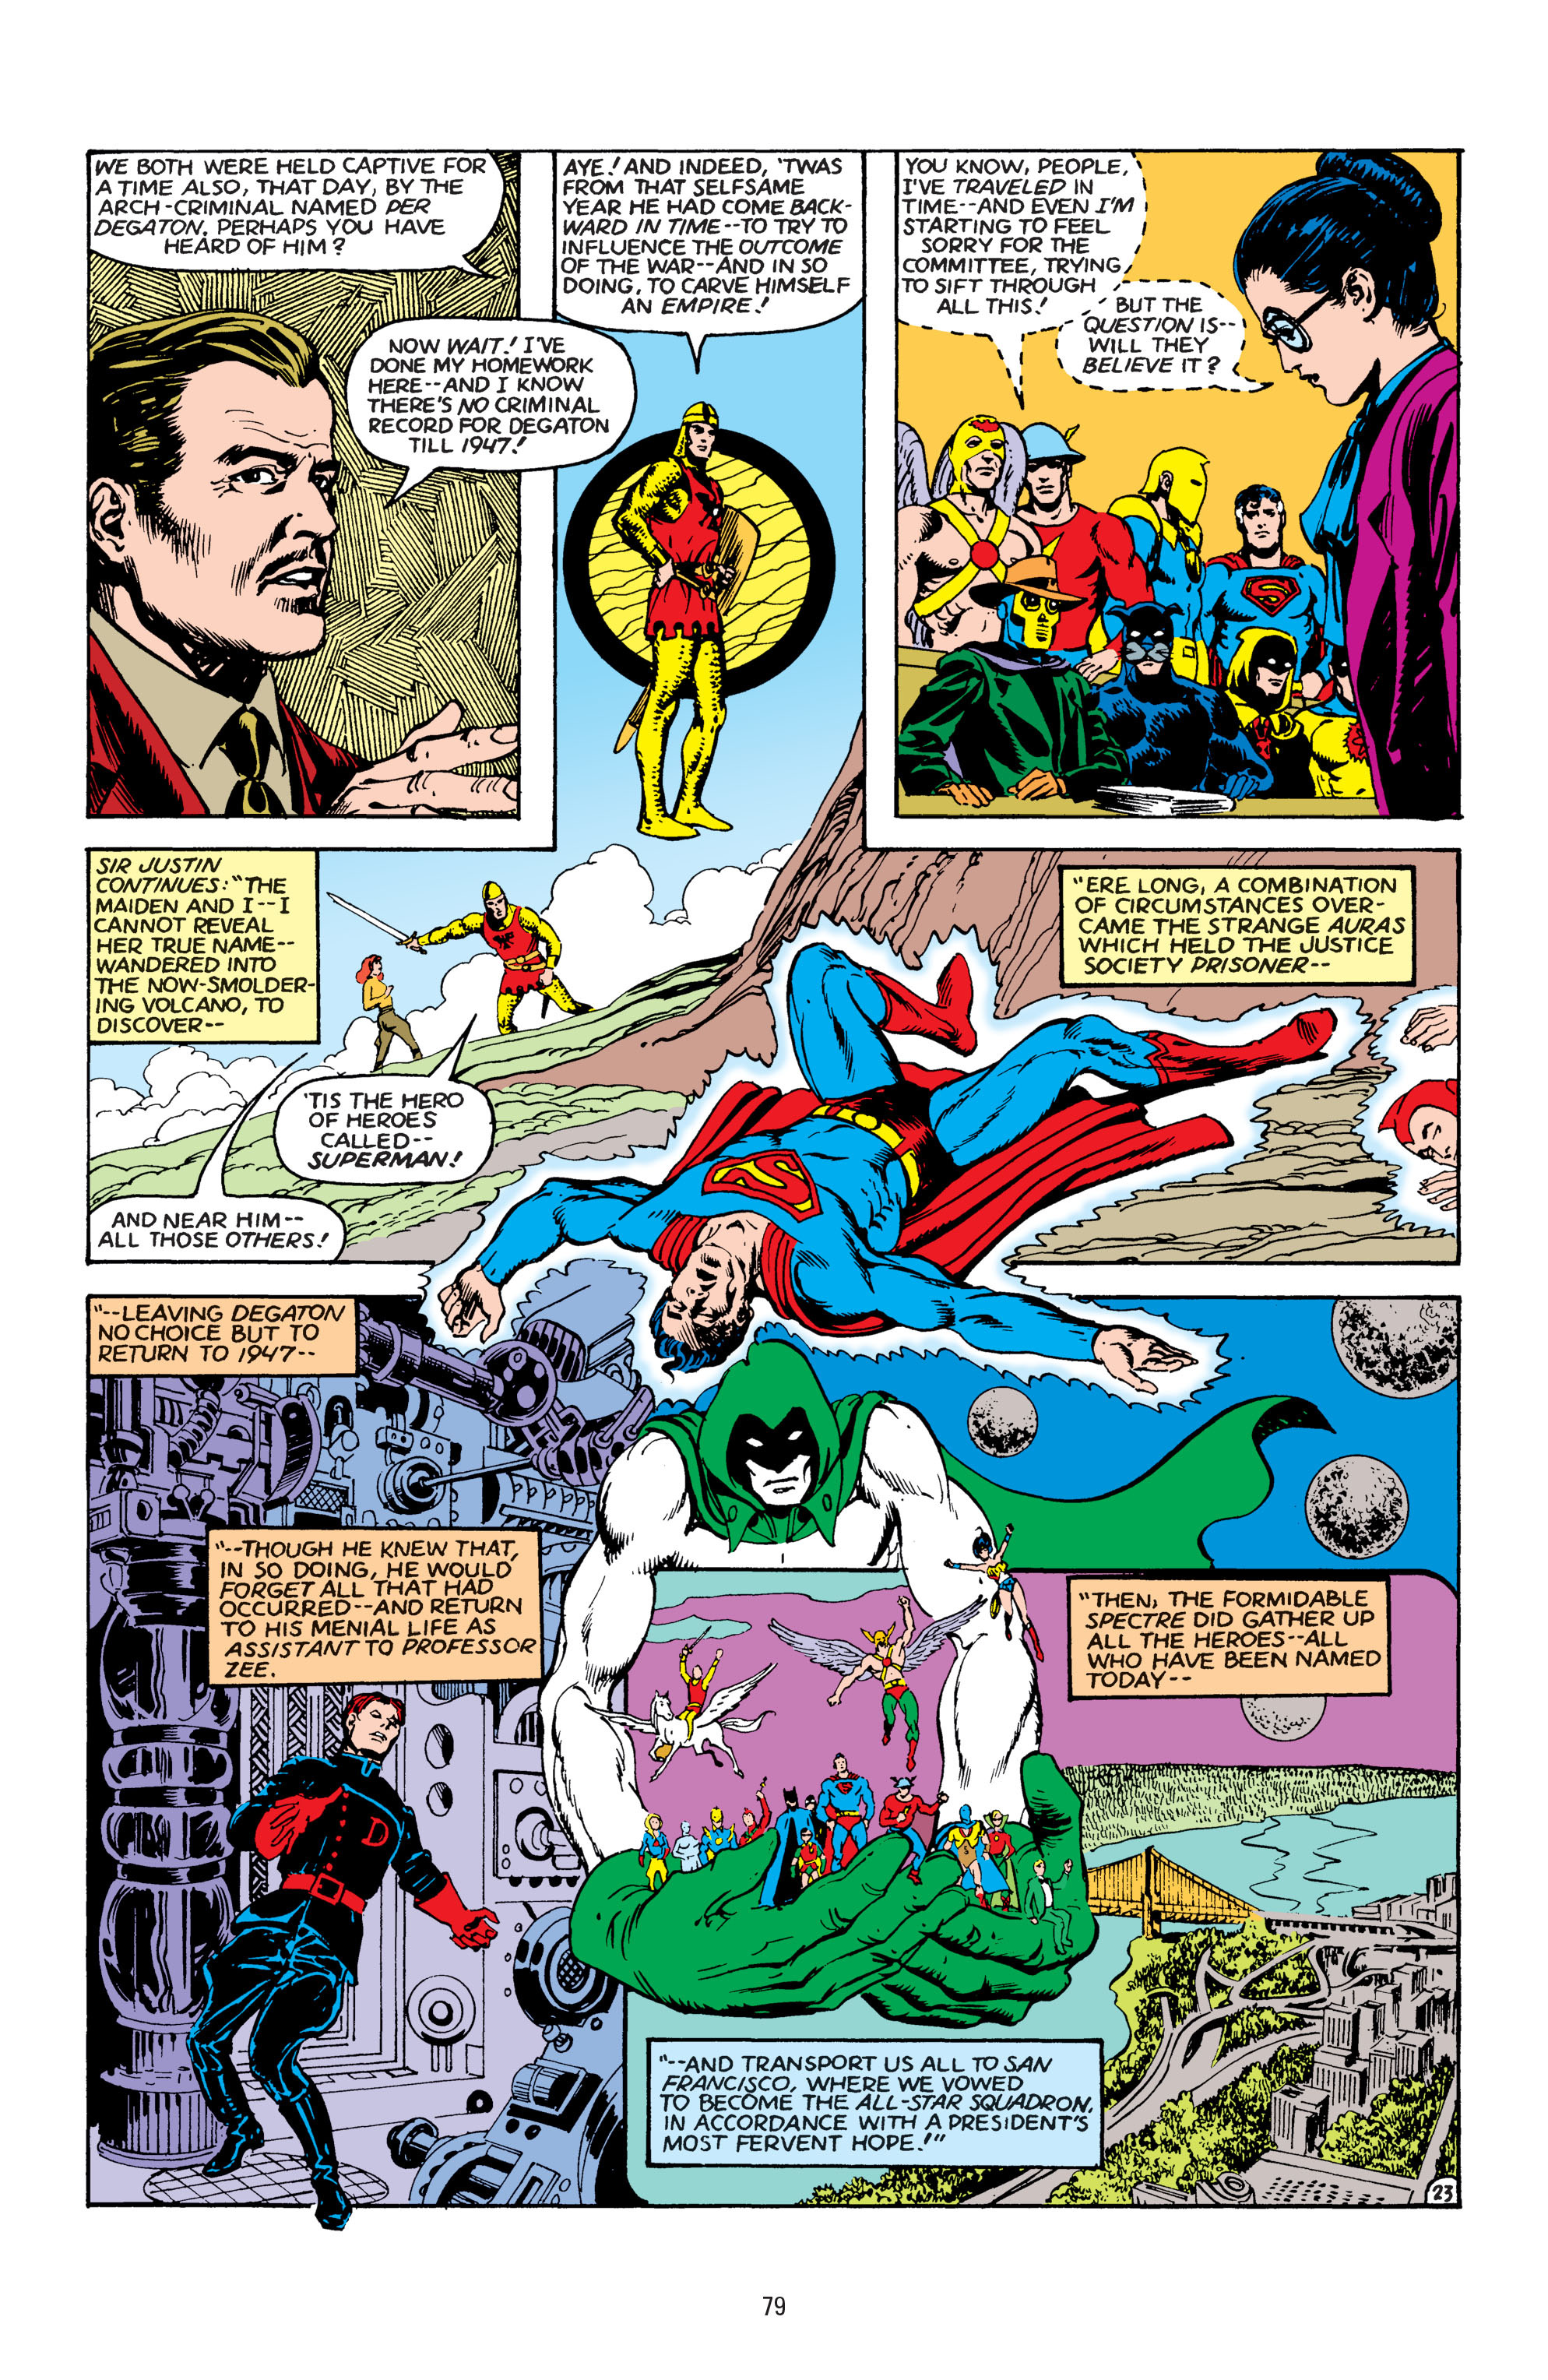 Read online America vs. the Justice Society comic -  Issue # TPB - 77